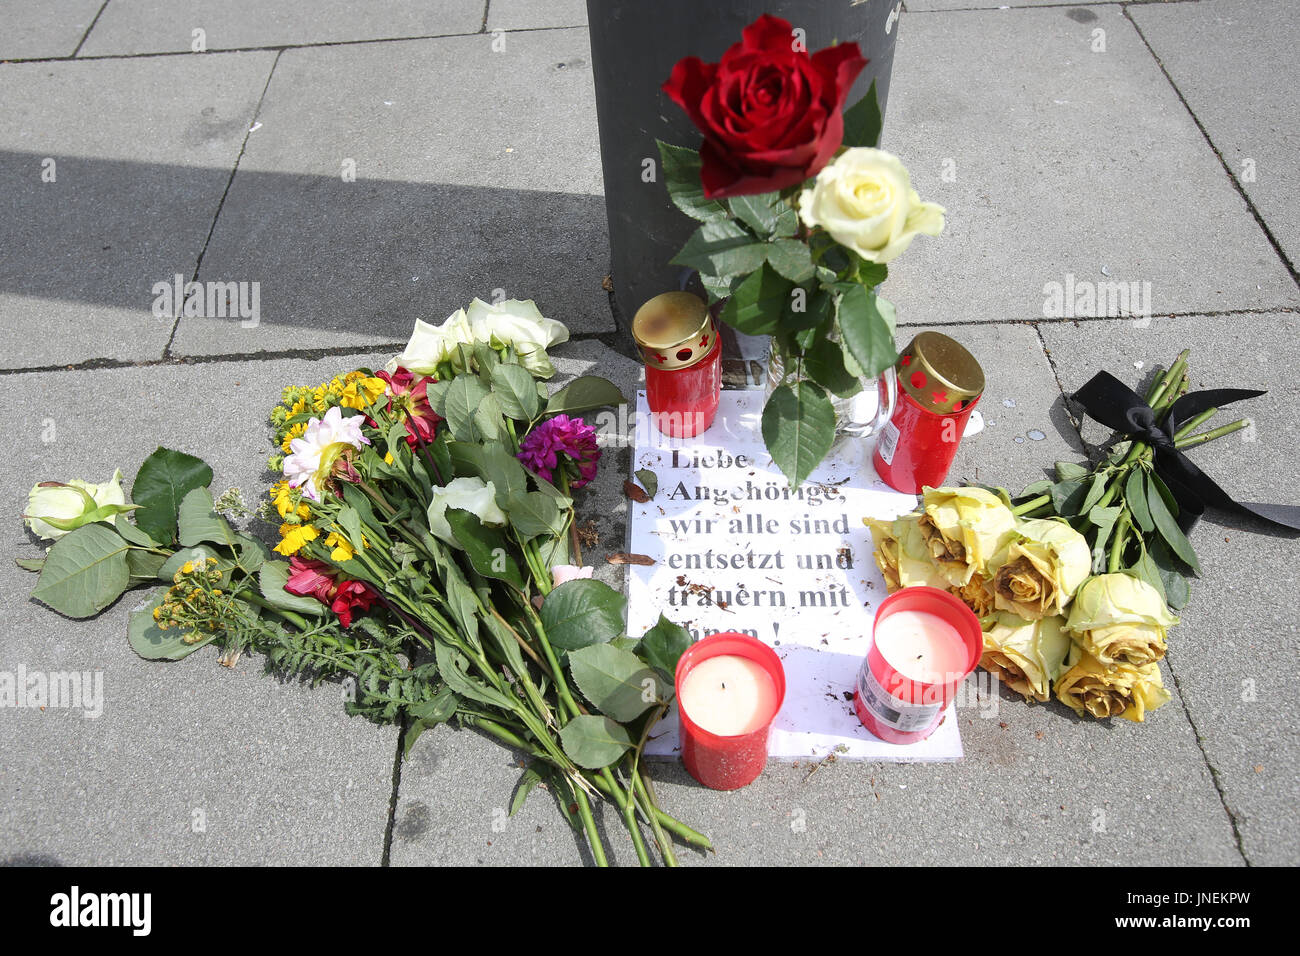 Hamburg, Germany. 30th July, 2017. A note reading 'Liebe Angehoerige, wir sind alle entsetzt und trauern mit euch' (lit. 'Dear family members, we are all shocked and mourn with you') can be seen between candles and flowers at a bus stop near a supermarket in which a man had killed another person an injured six further people with a knife in the district of Barmbek in Hamburg, Germany, 30 July 2017. Photo: Bodo Marks/dpa/Alamy Live News Stock Photo